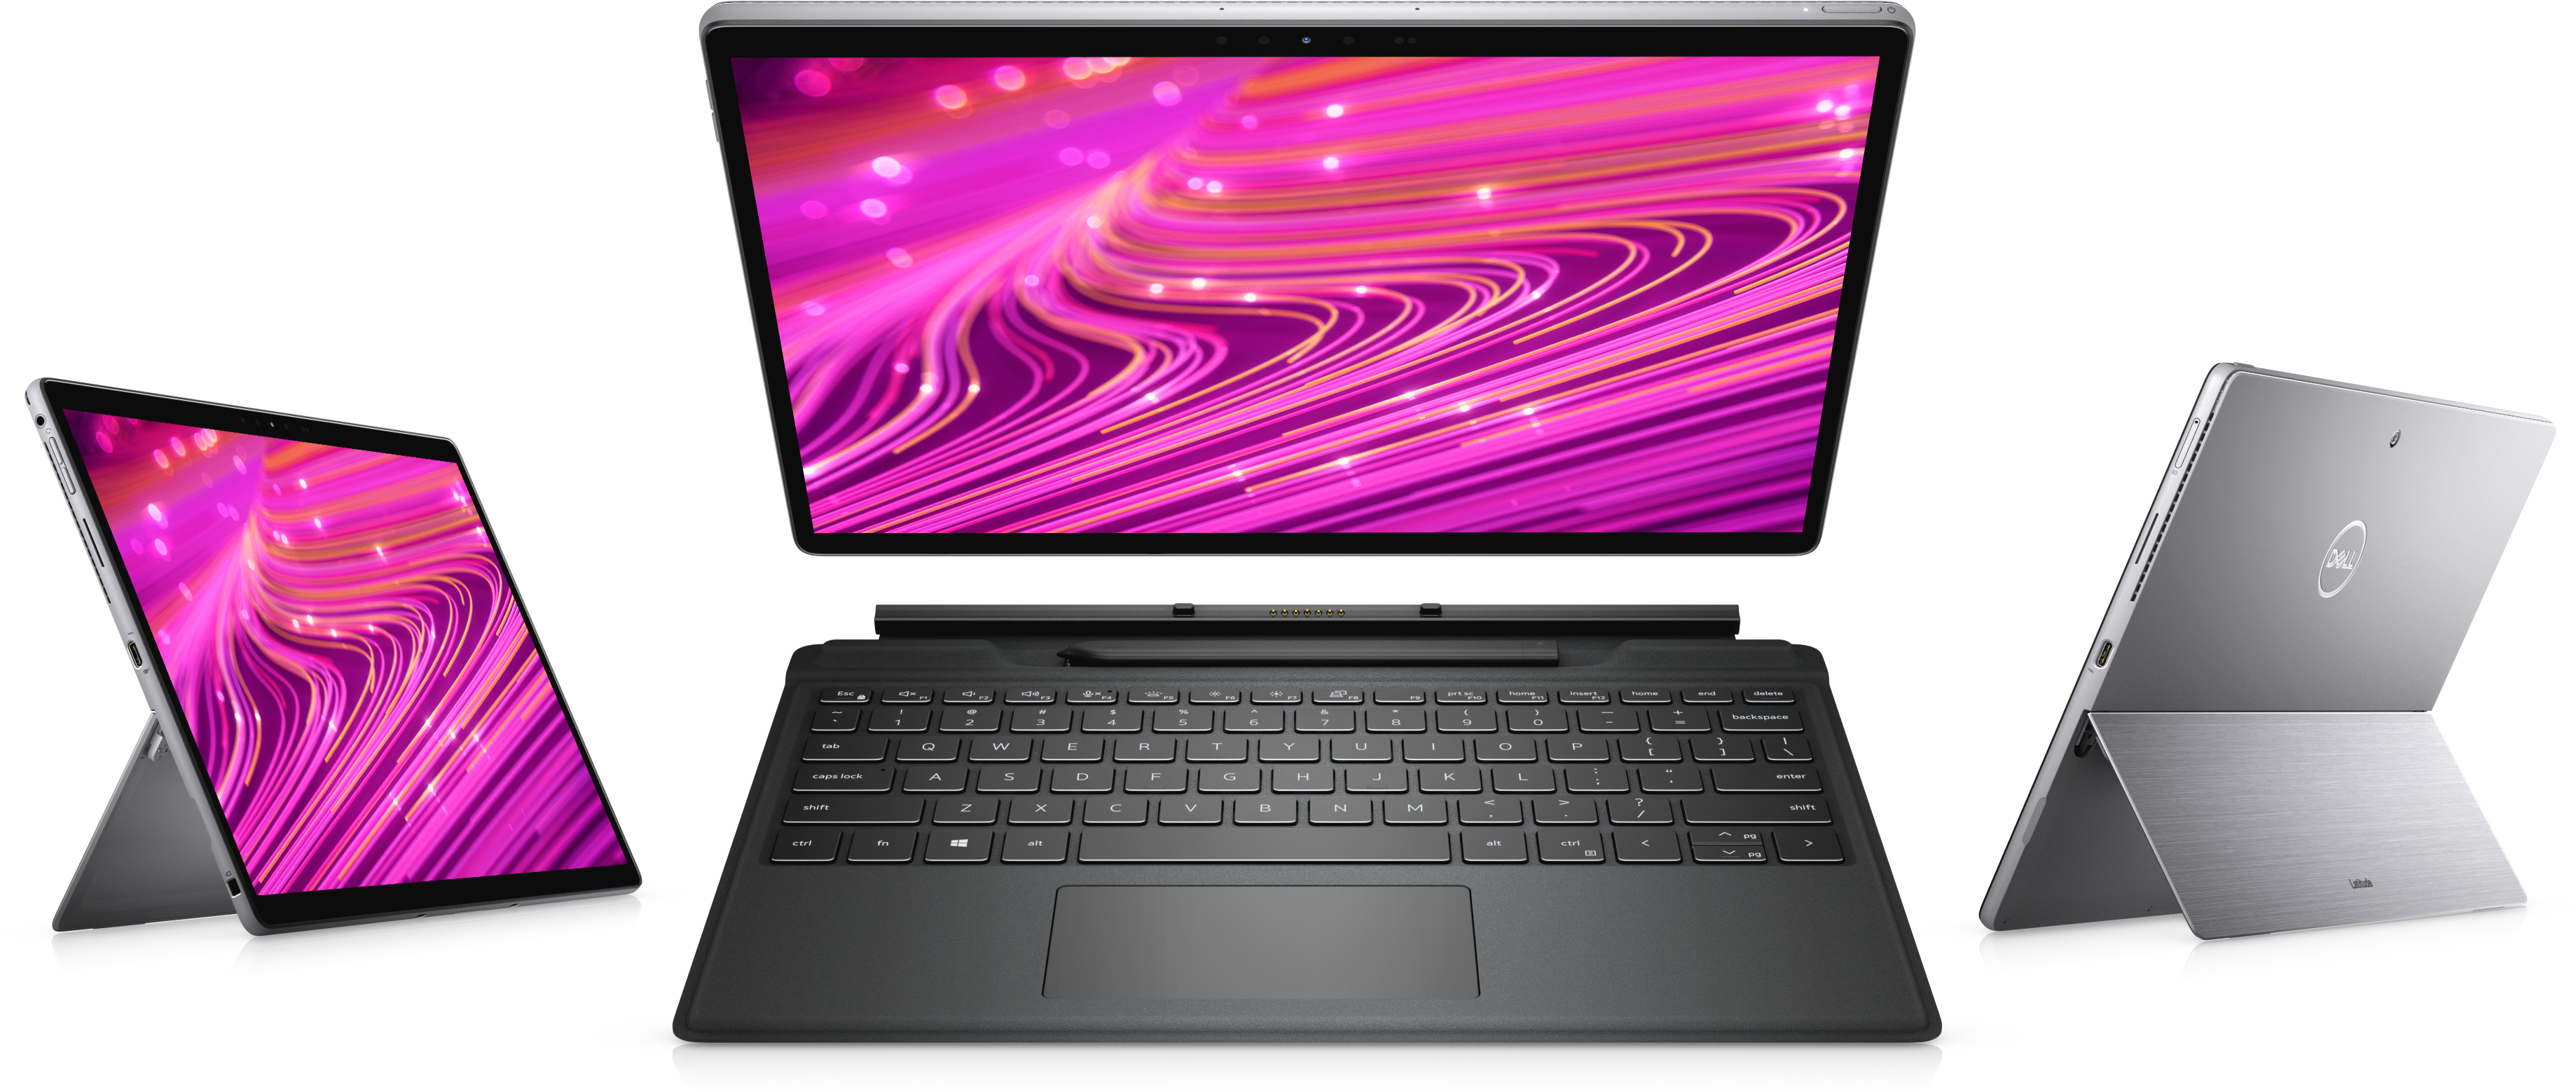 Dell Latitude 7320 Detachable is a Surface Pro X clone with Tiger Lake internal components